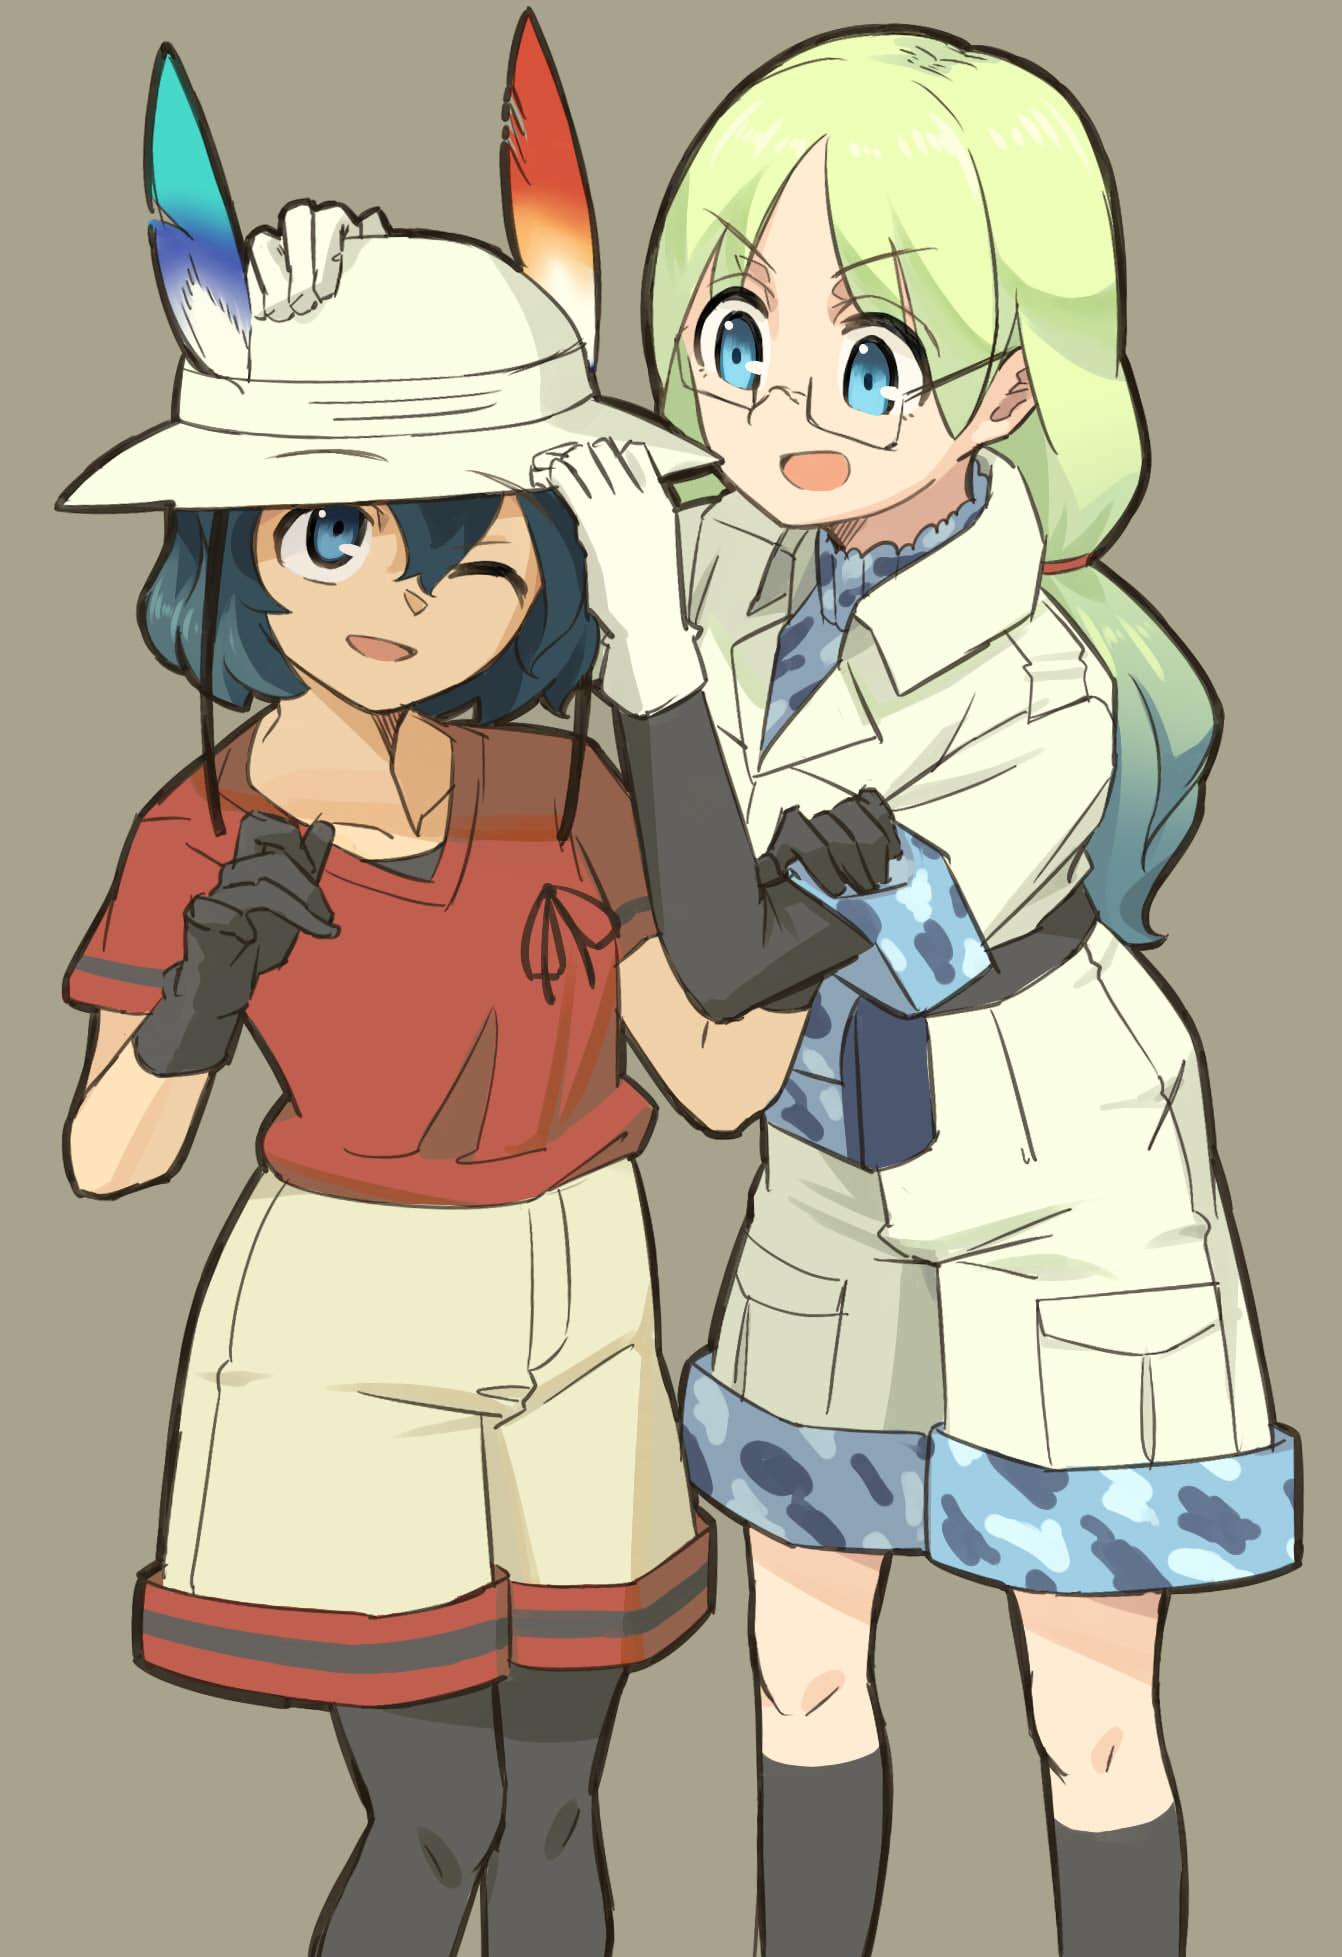 2girls 524_(kemono_ethread) black_hair blue_eyes blue_hair bucket_hat camouflage_trim cargo_shorts commentary_request elbow_gloves eyebrows_visible_through_hair feathers glasses gloves gradient_hair green_hair hair_tie hand_on_another's_head hat headwear_removed highres kaban_(kemono_friends) kemono_friends khakis kneehighs long_hair mirai_(kemono_friends) multicolored_hair multiple_girls one_eye_closed pantyhose shirt short_hair shorts t-shirt v-shaped_eyebrows